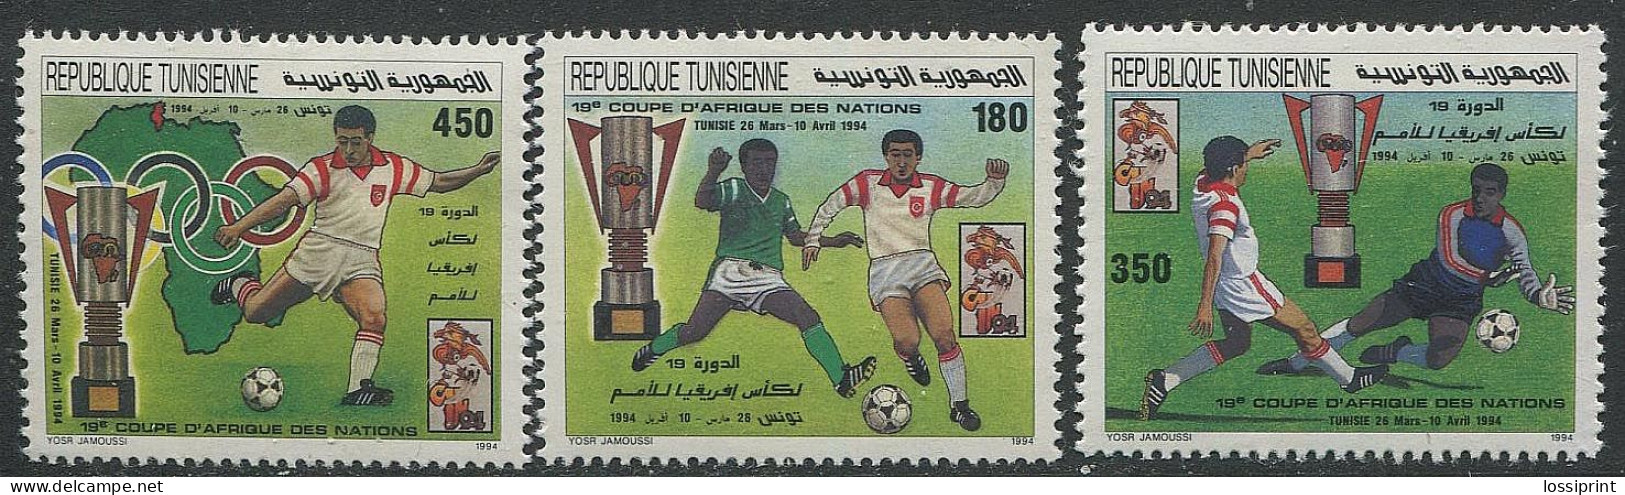 Tunisie:Tunisia:Unused Stamps Serie African Cup, Football, Soccer, 1994, MNH - Afrika Cup